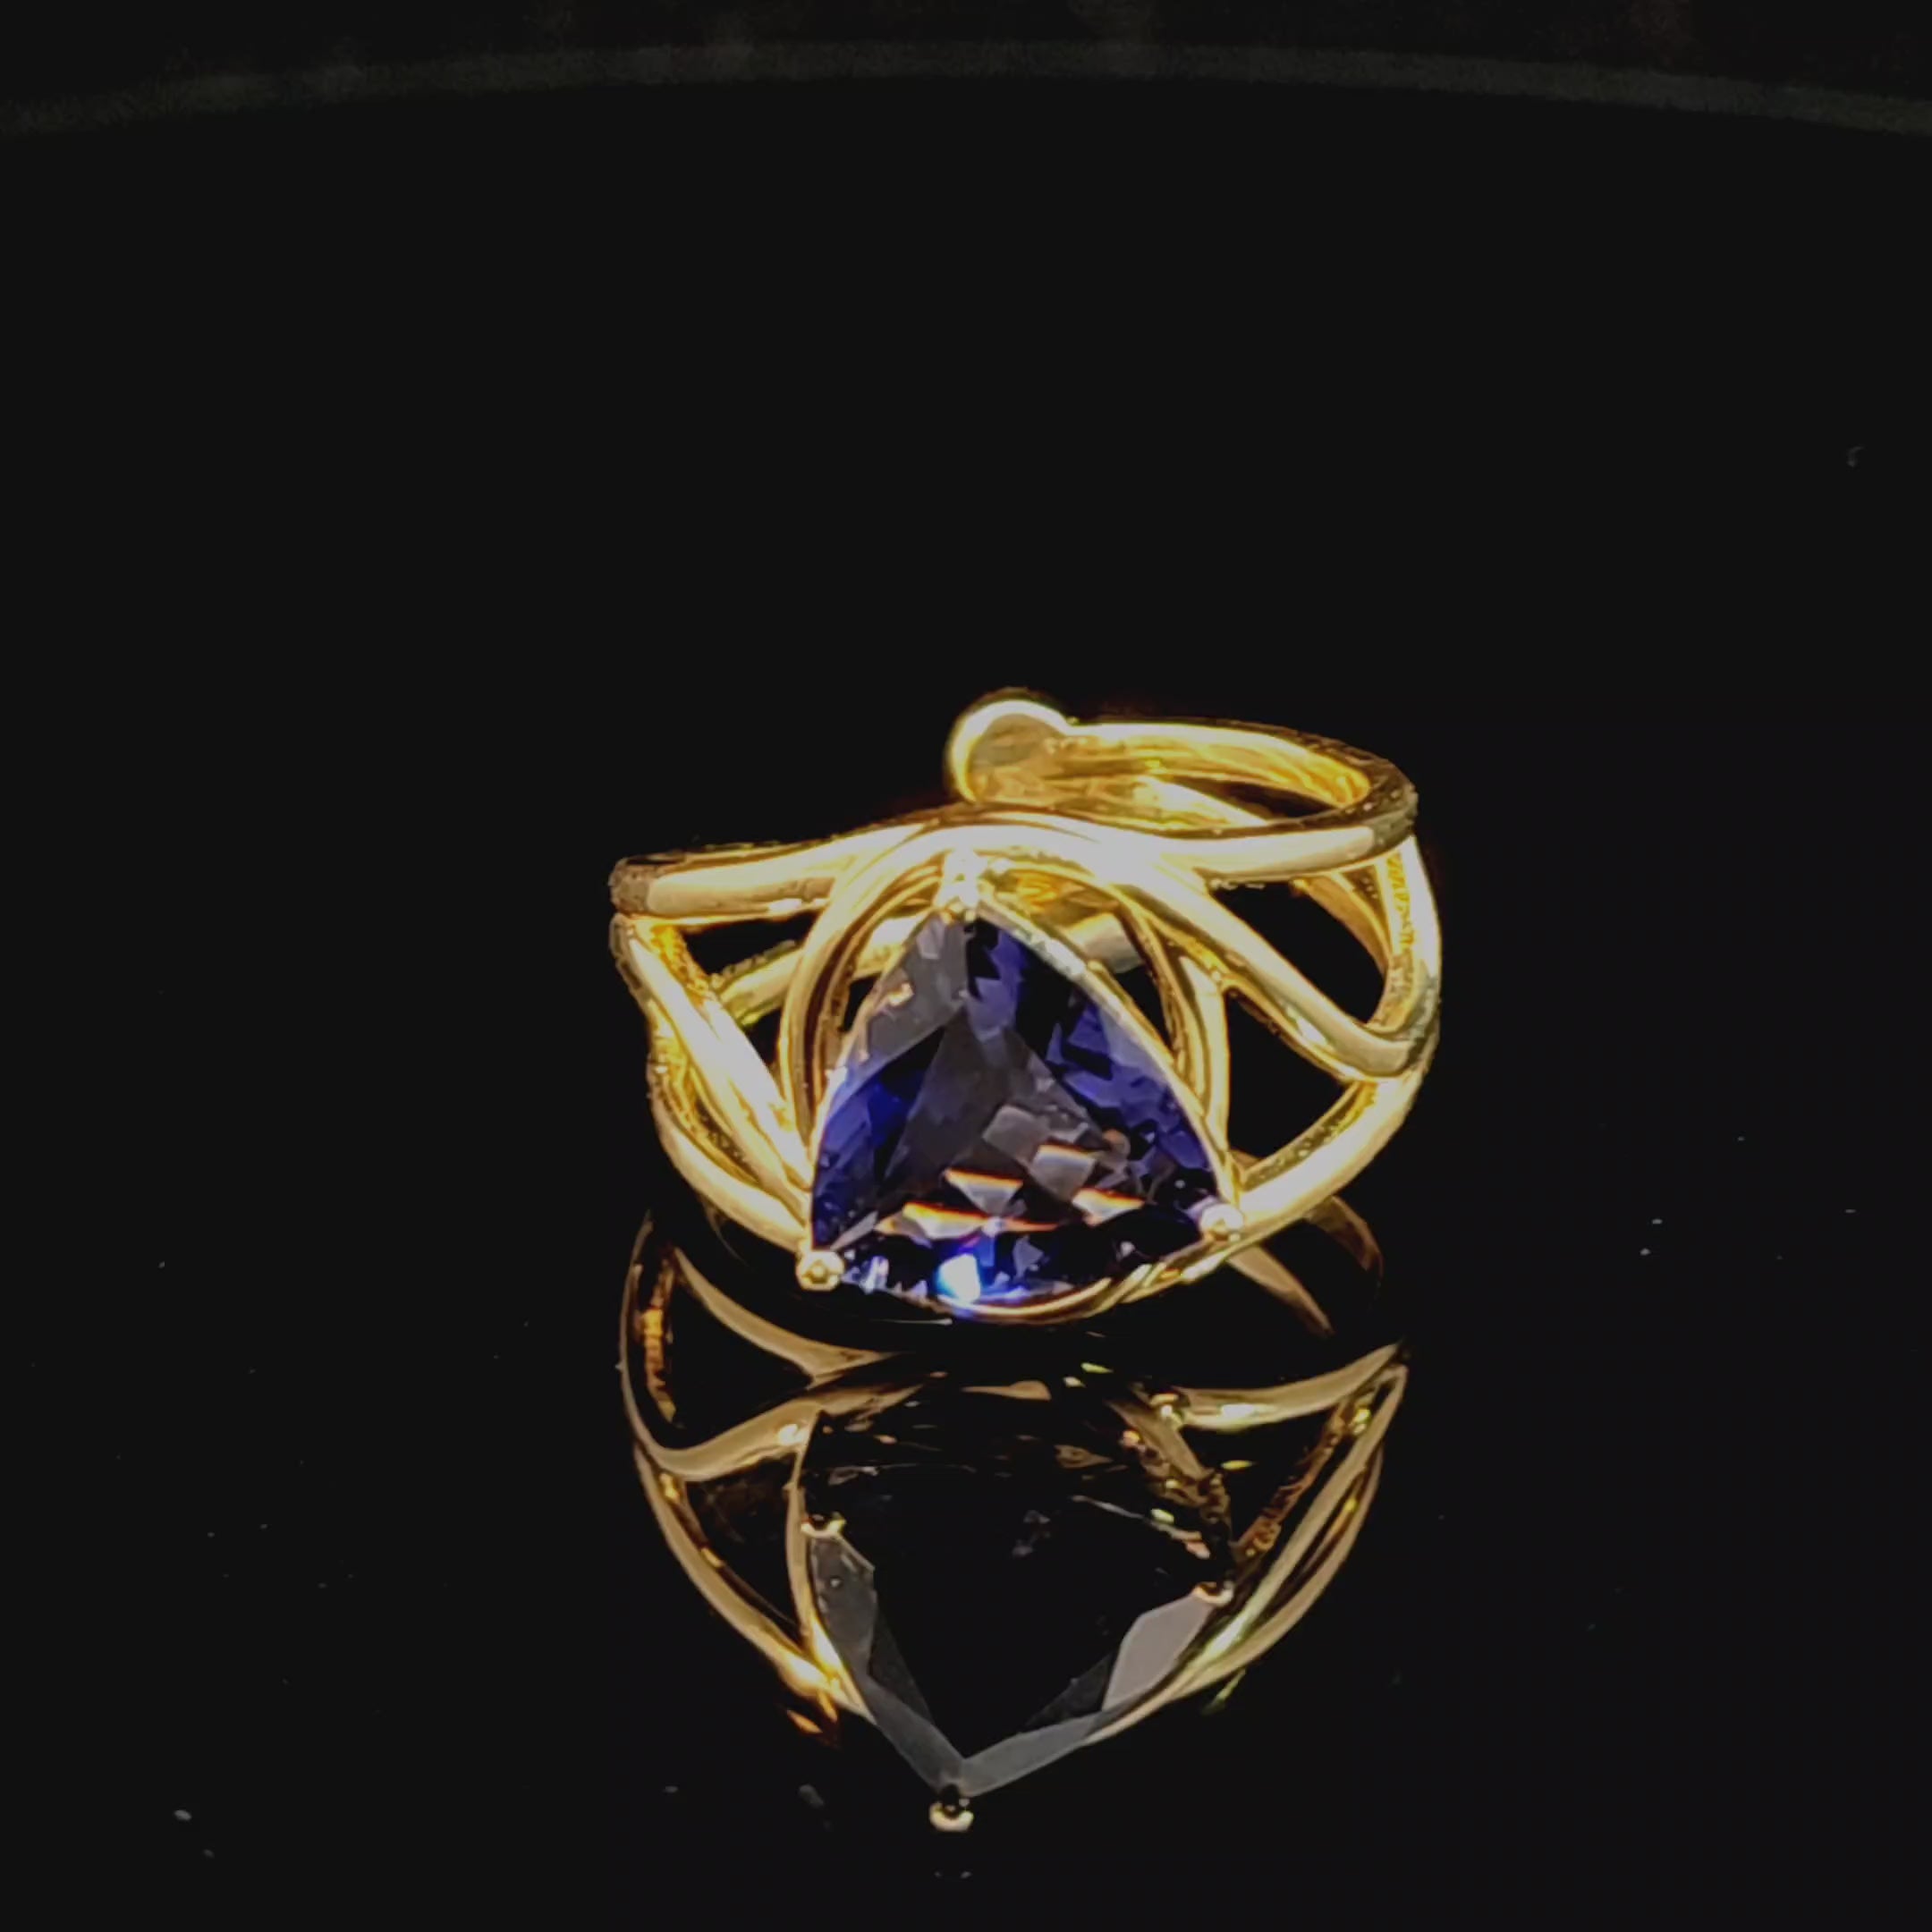 Iolite Adjustable Finger Cuff Ring 18K Solid Gold for Sharpening Intuition and Enhancing Visions